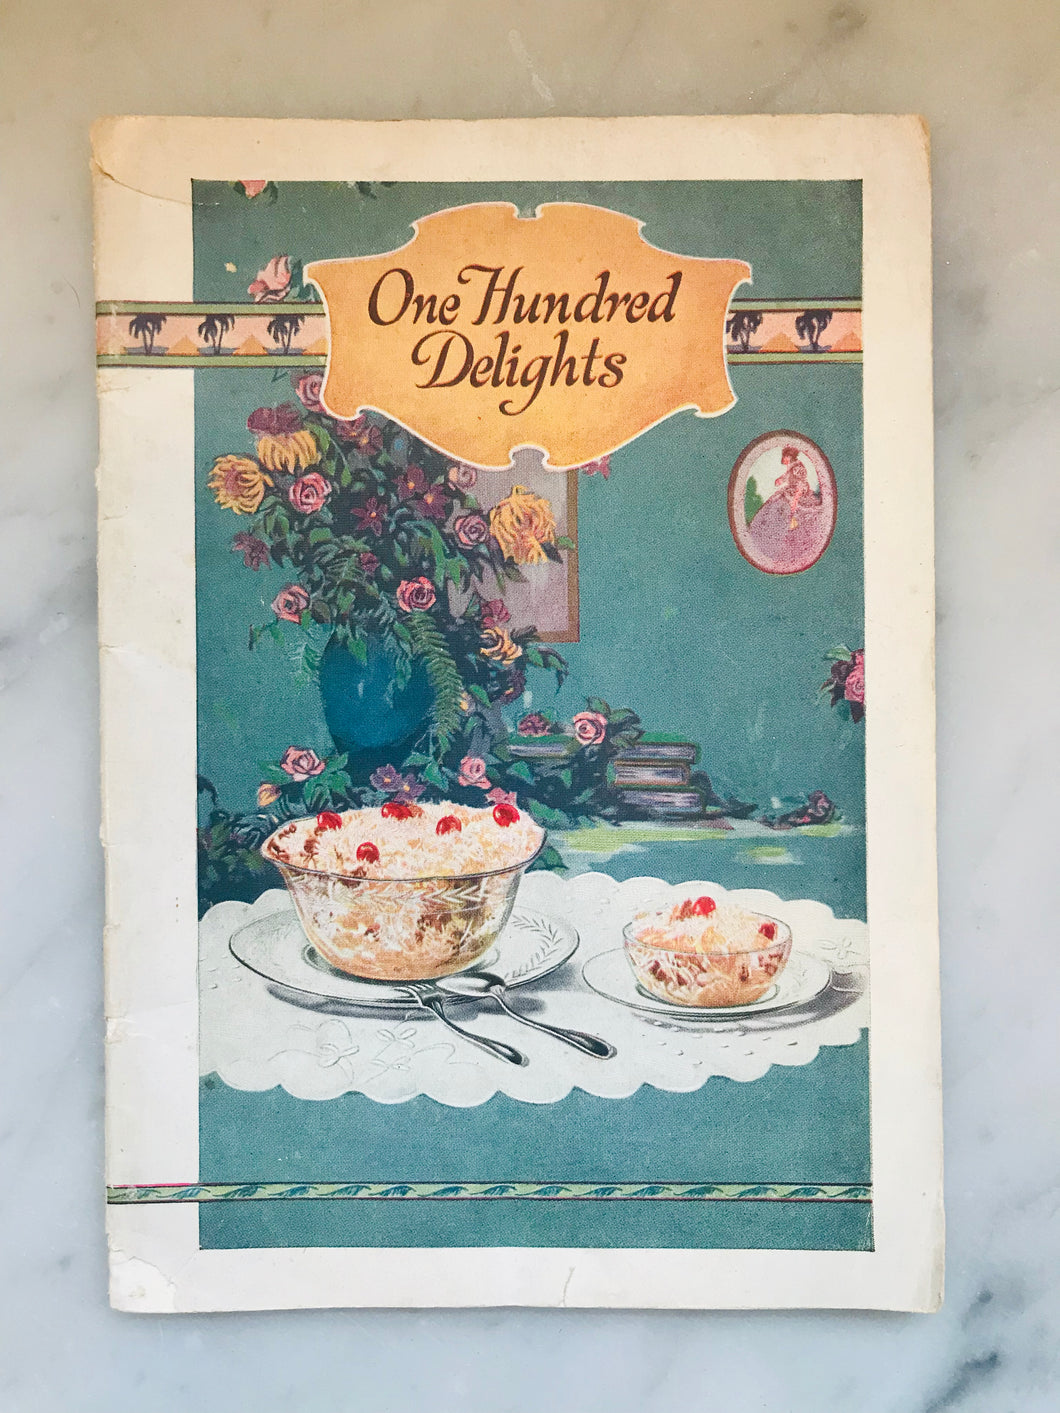 One Hundred Delights